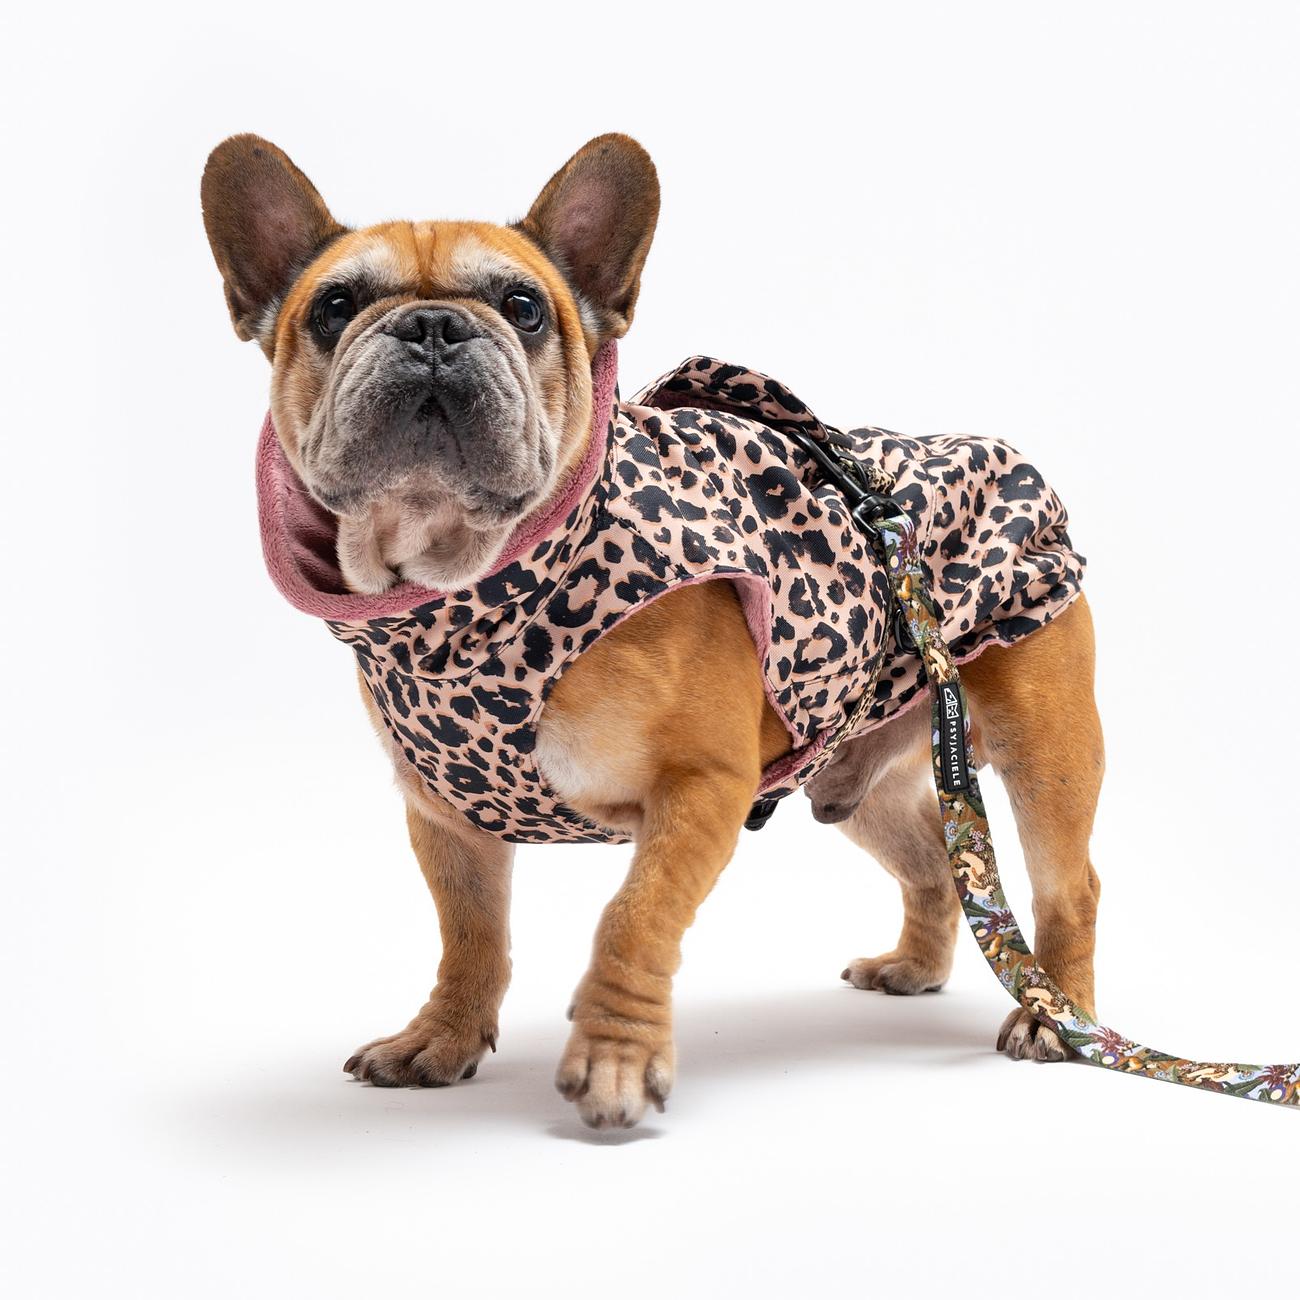 Dog jacket "Respect the wildness"